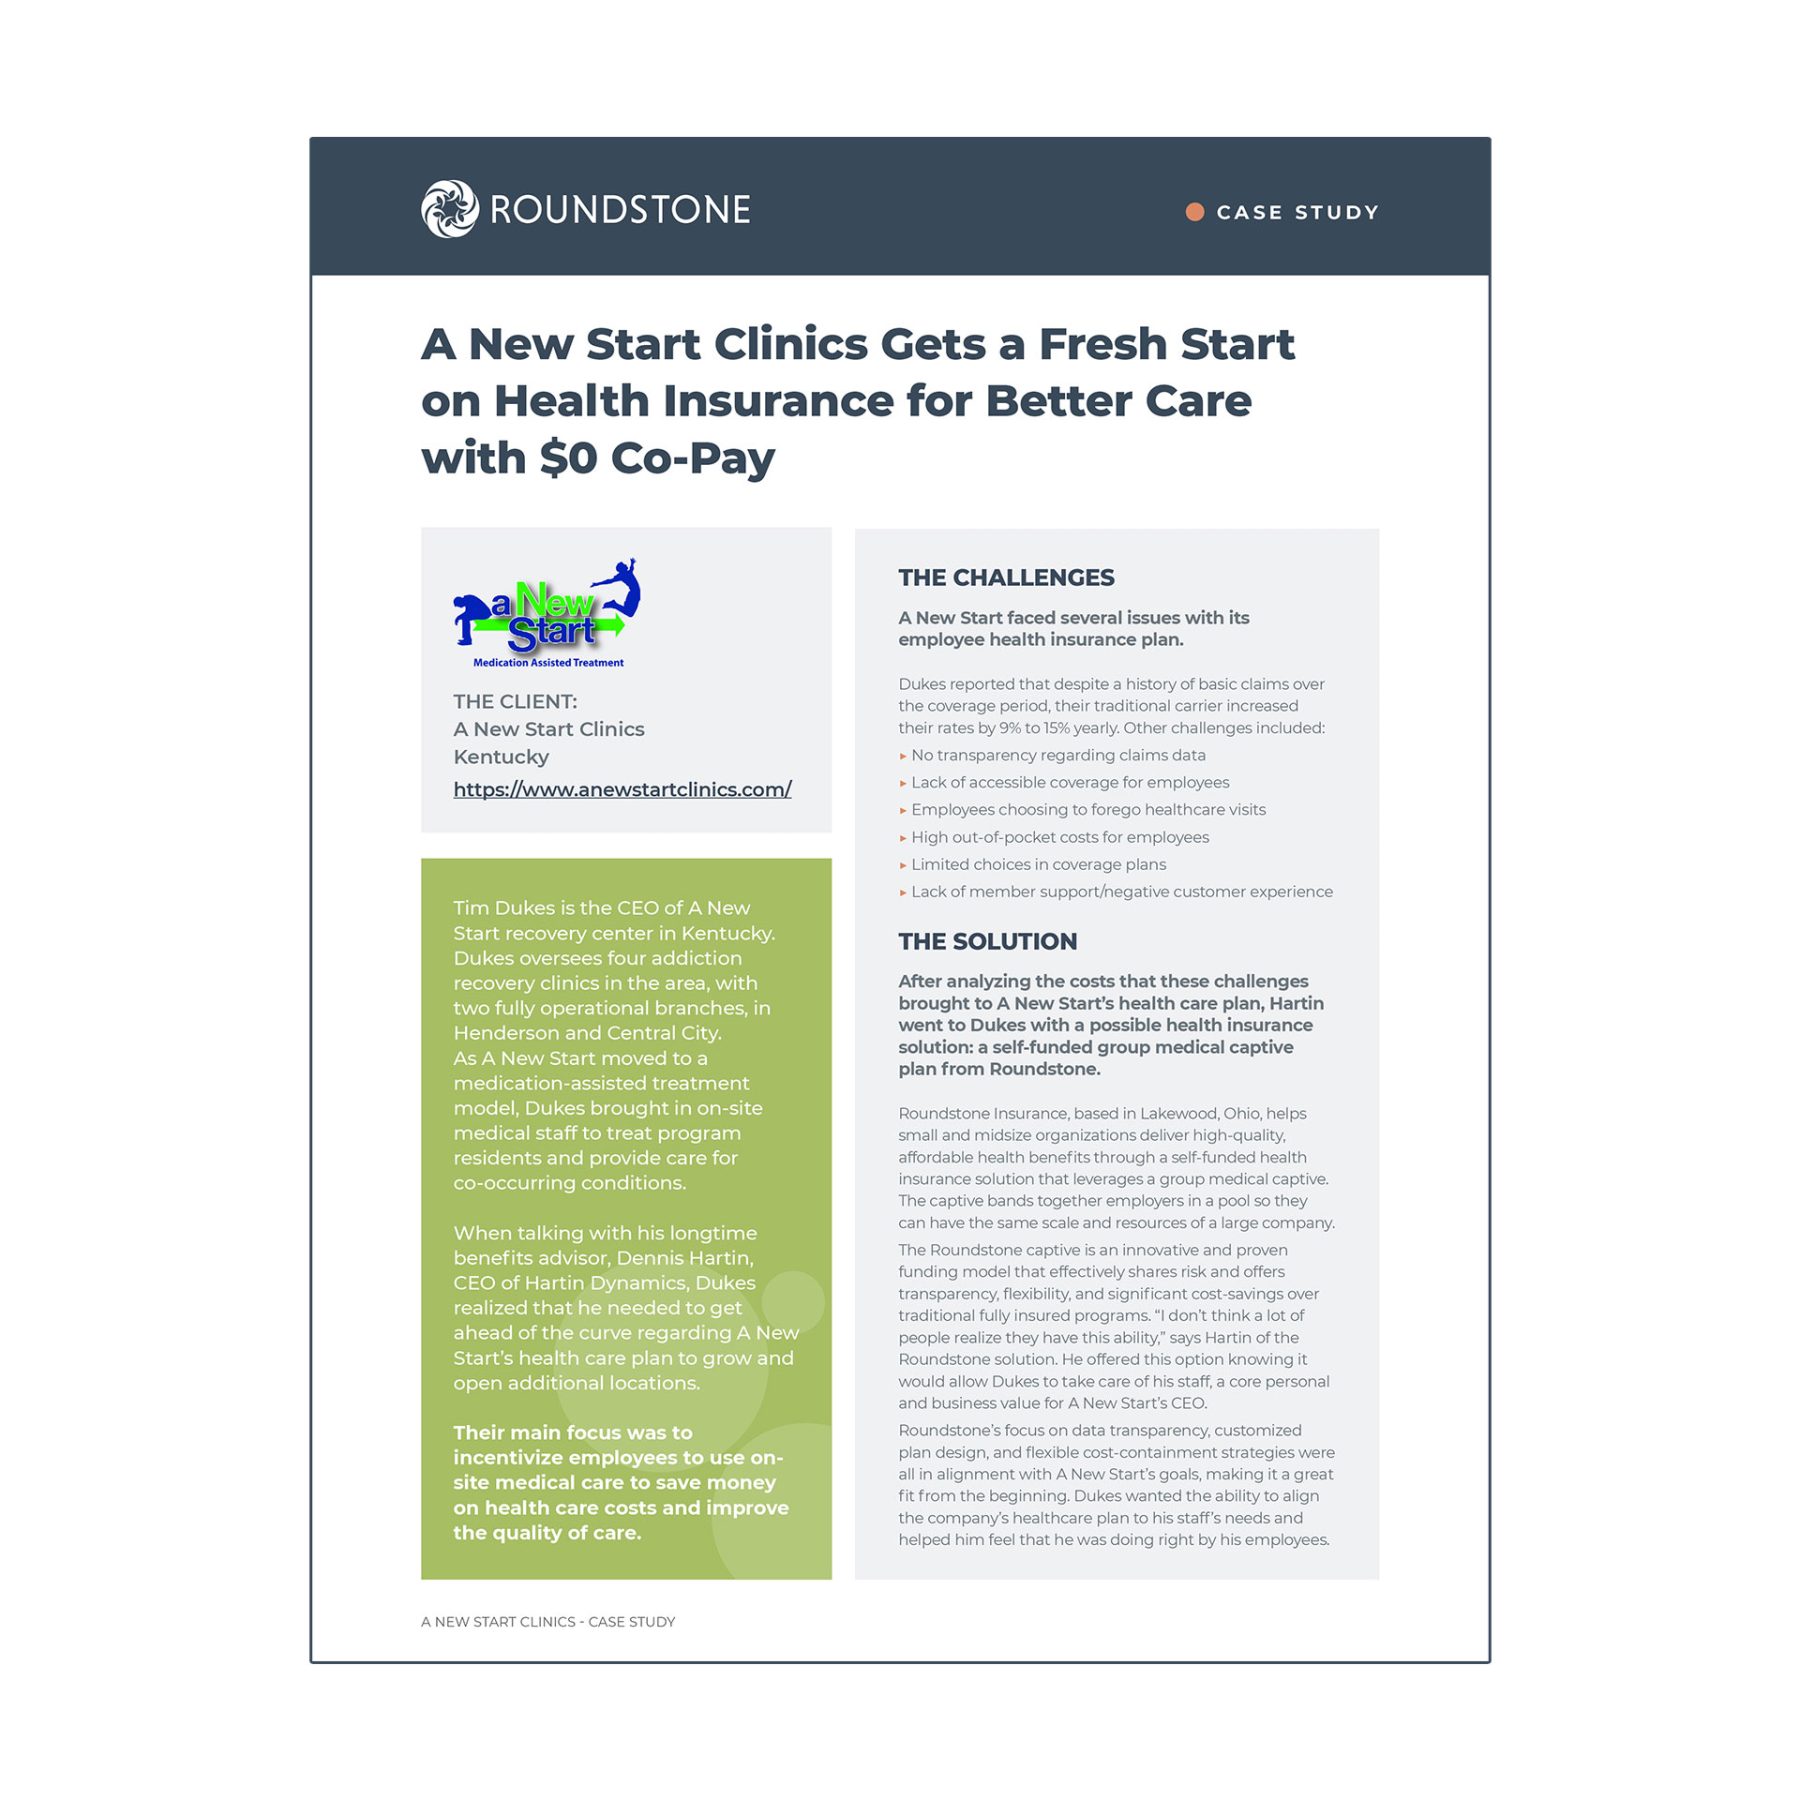 A-New-Start-Clinics-Case-Study-Handout-Mockup-for-Gallery_612x792